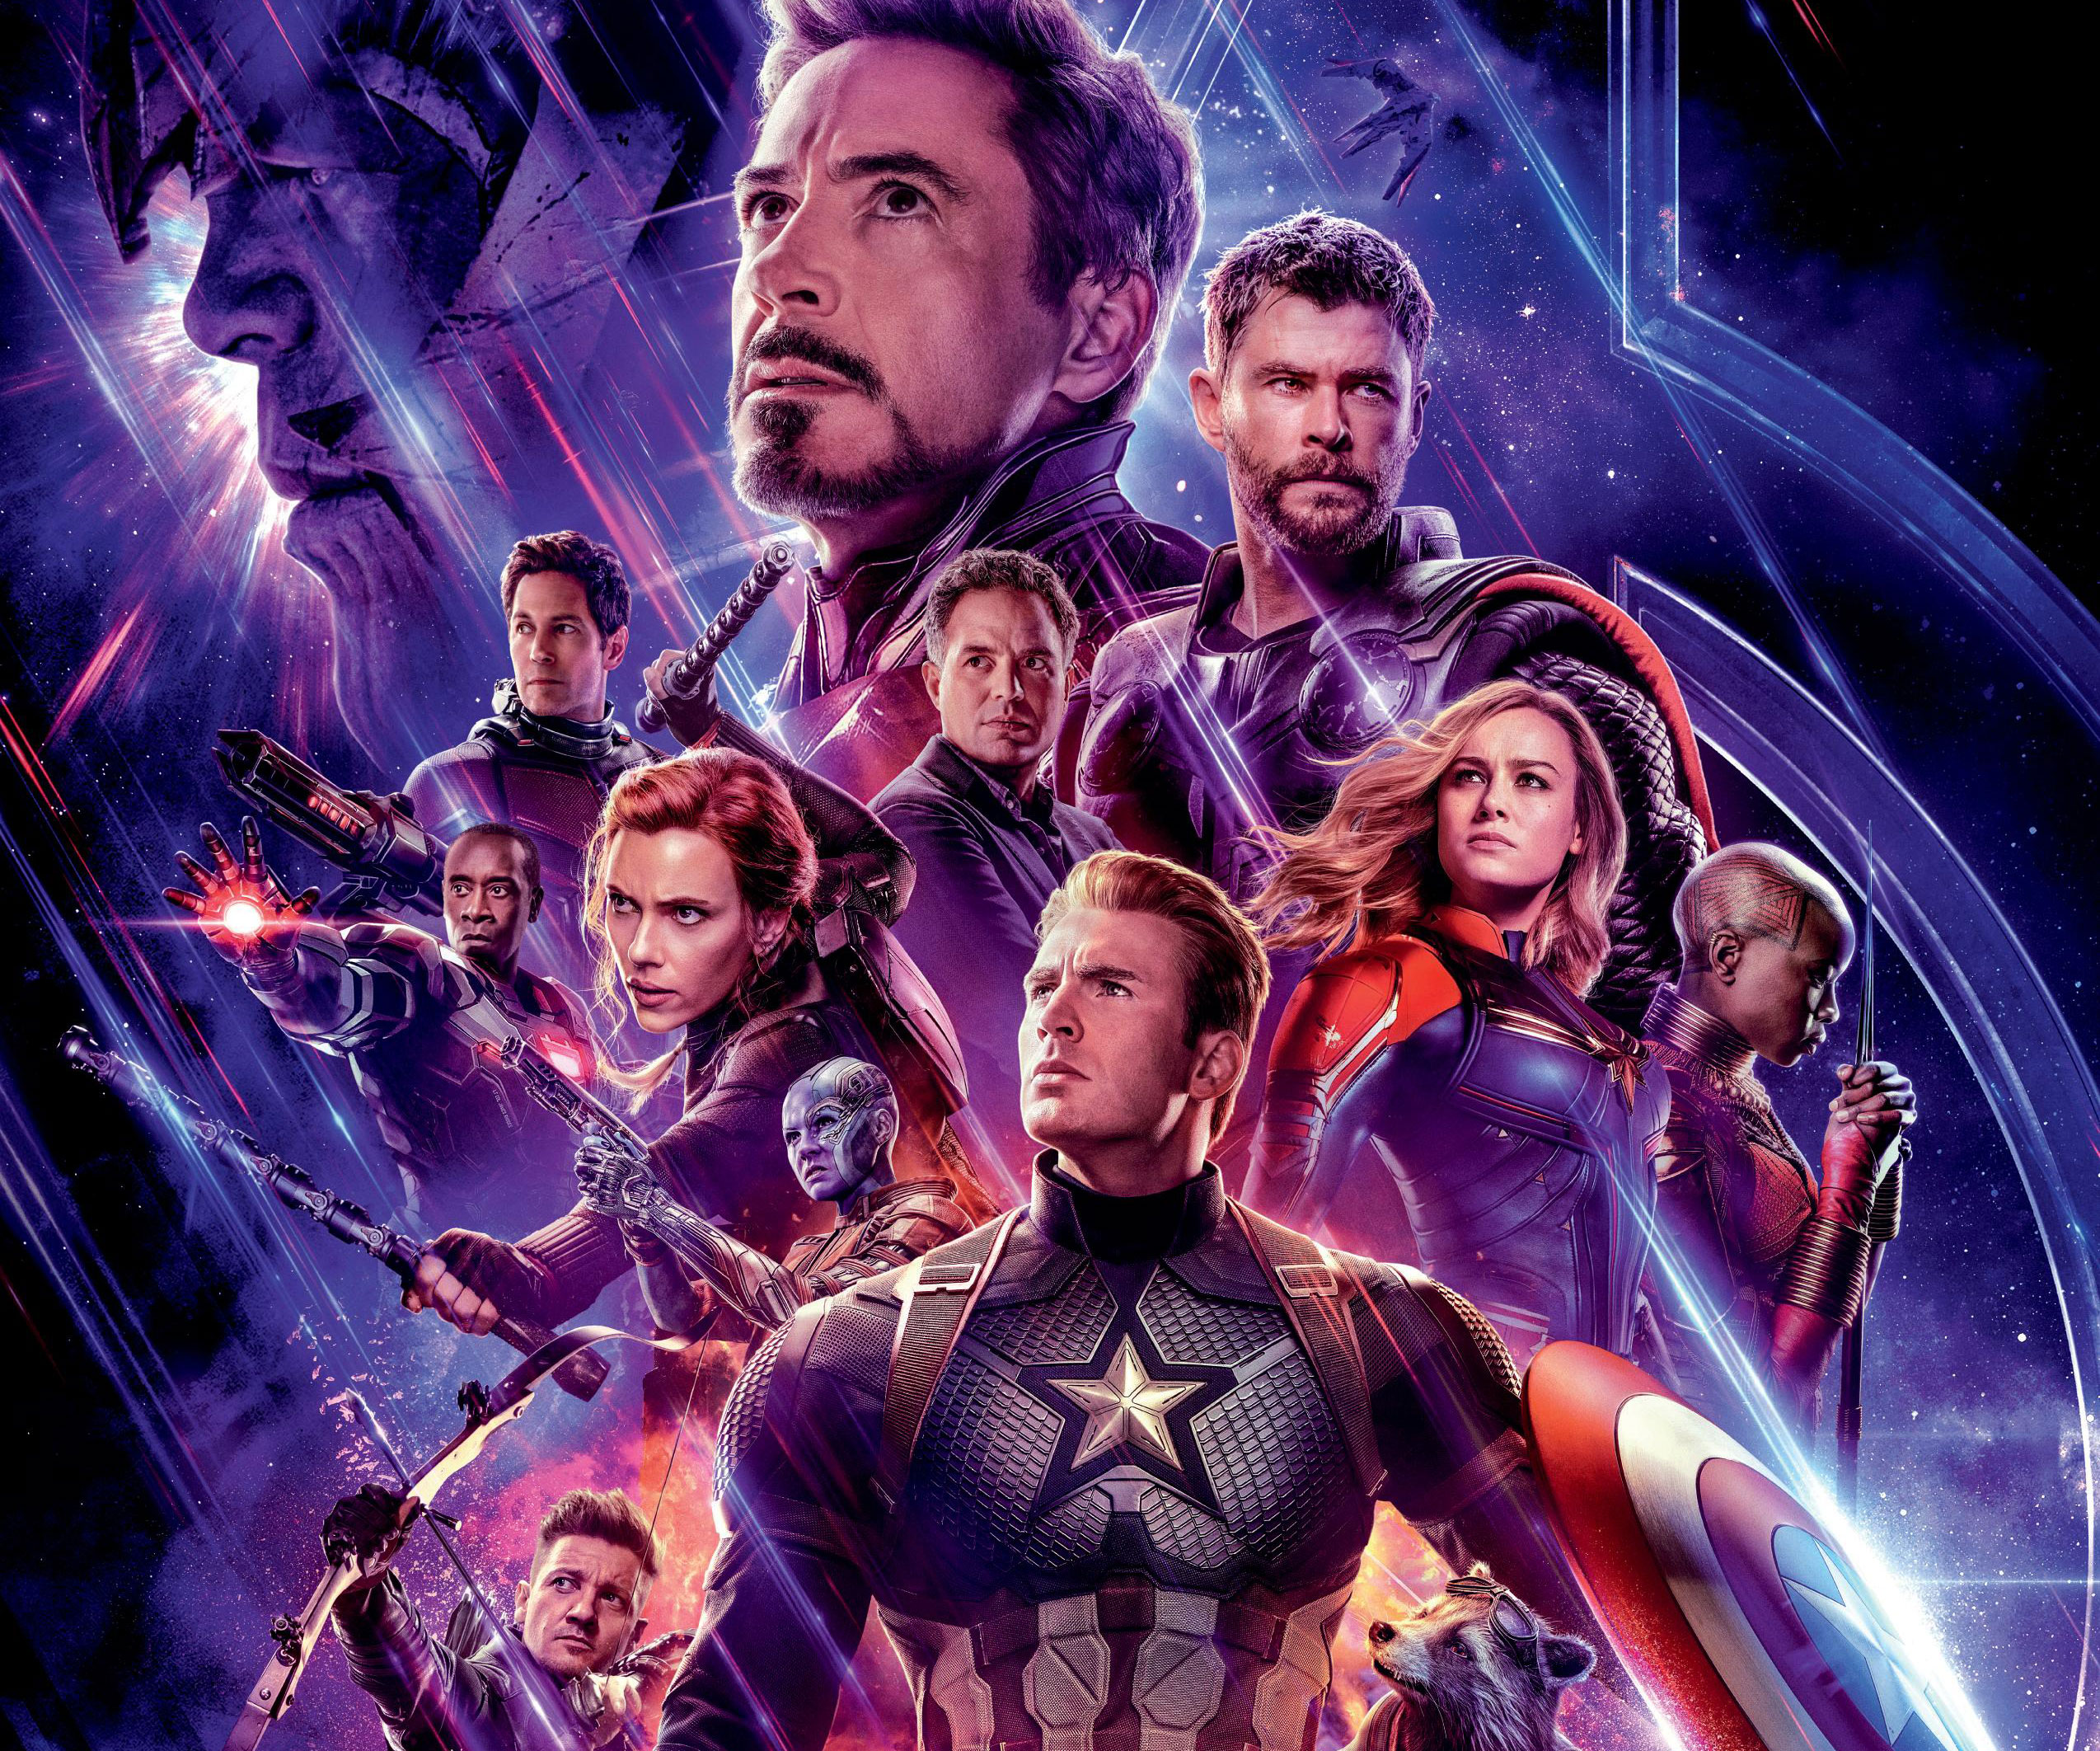 The MCU has more surprises in store for Avengers fans in super-sized DVD